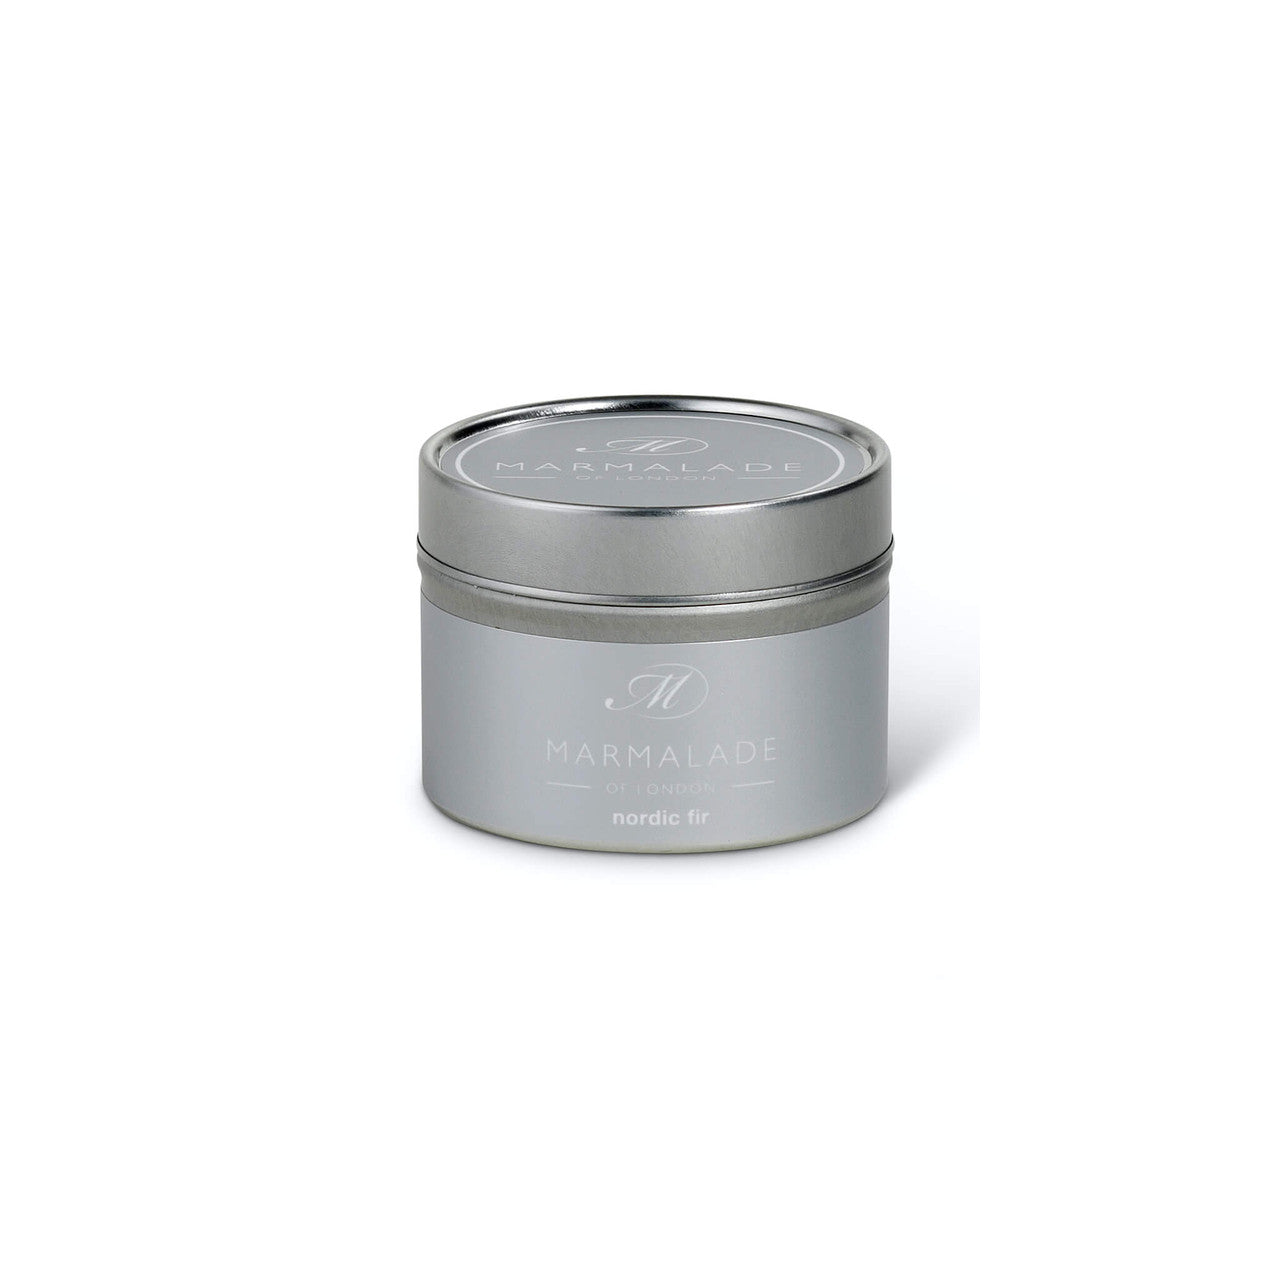 Nordic Fir small tin candle from Marmalade of London.